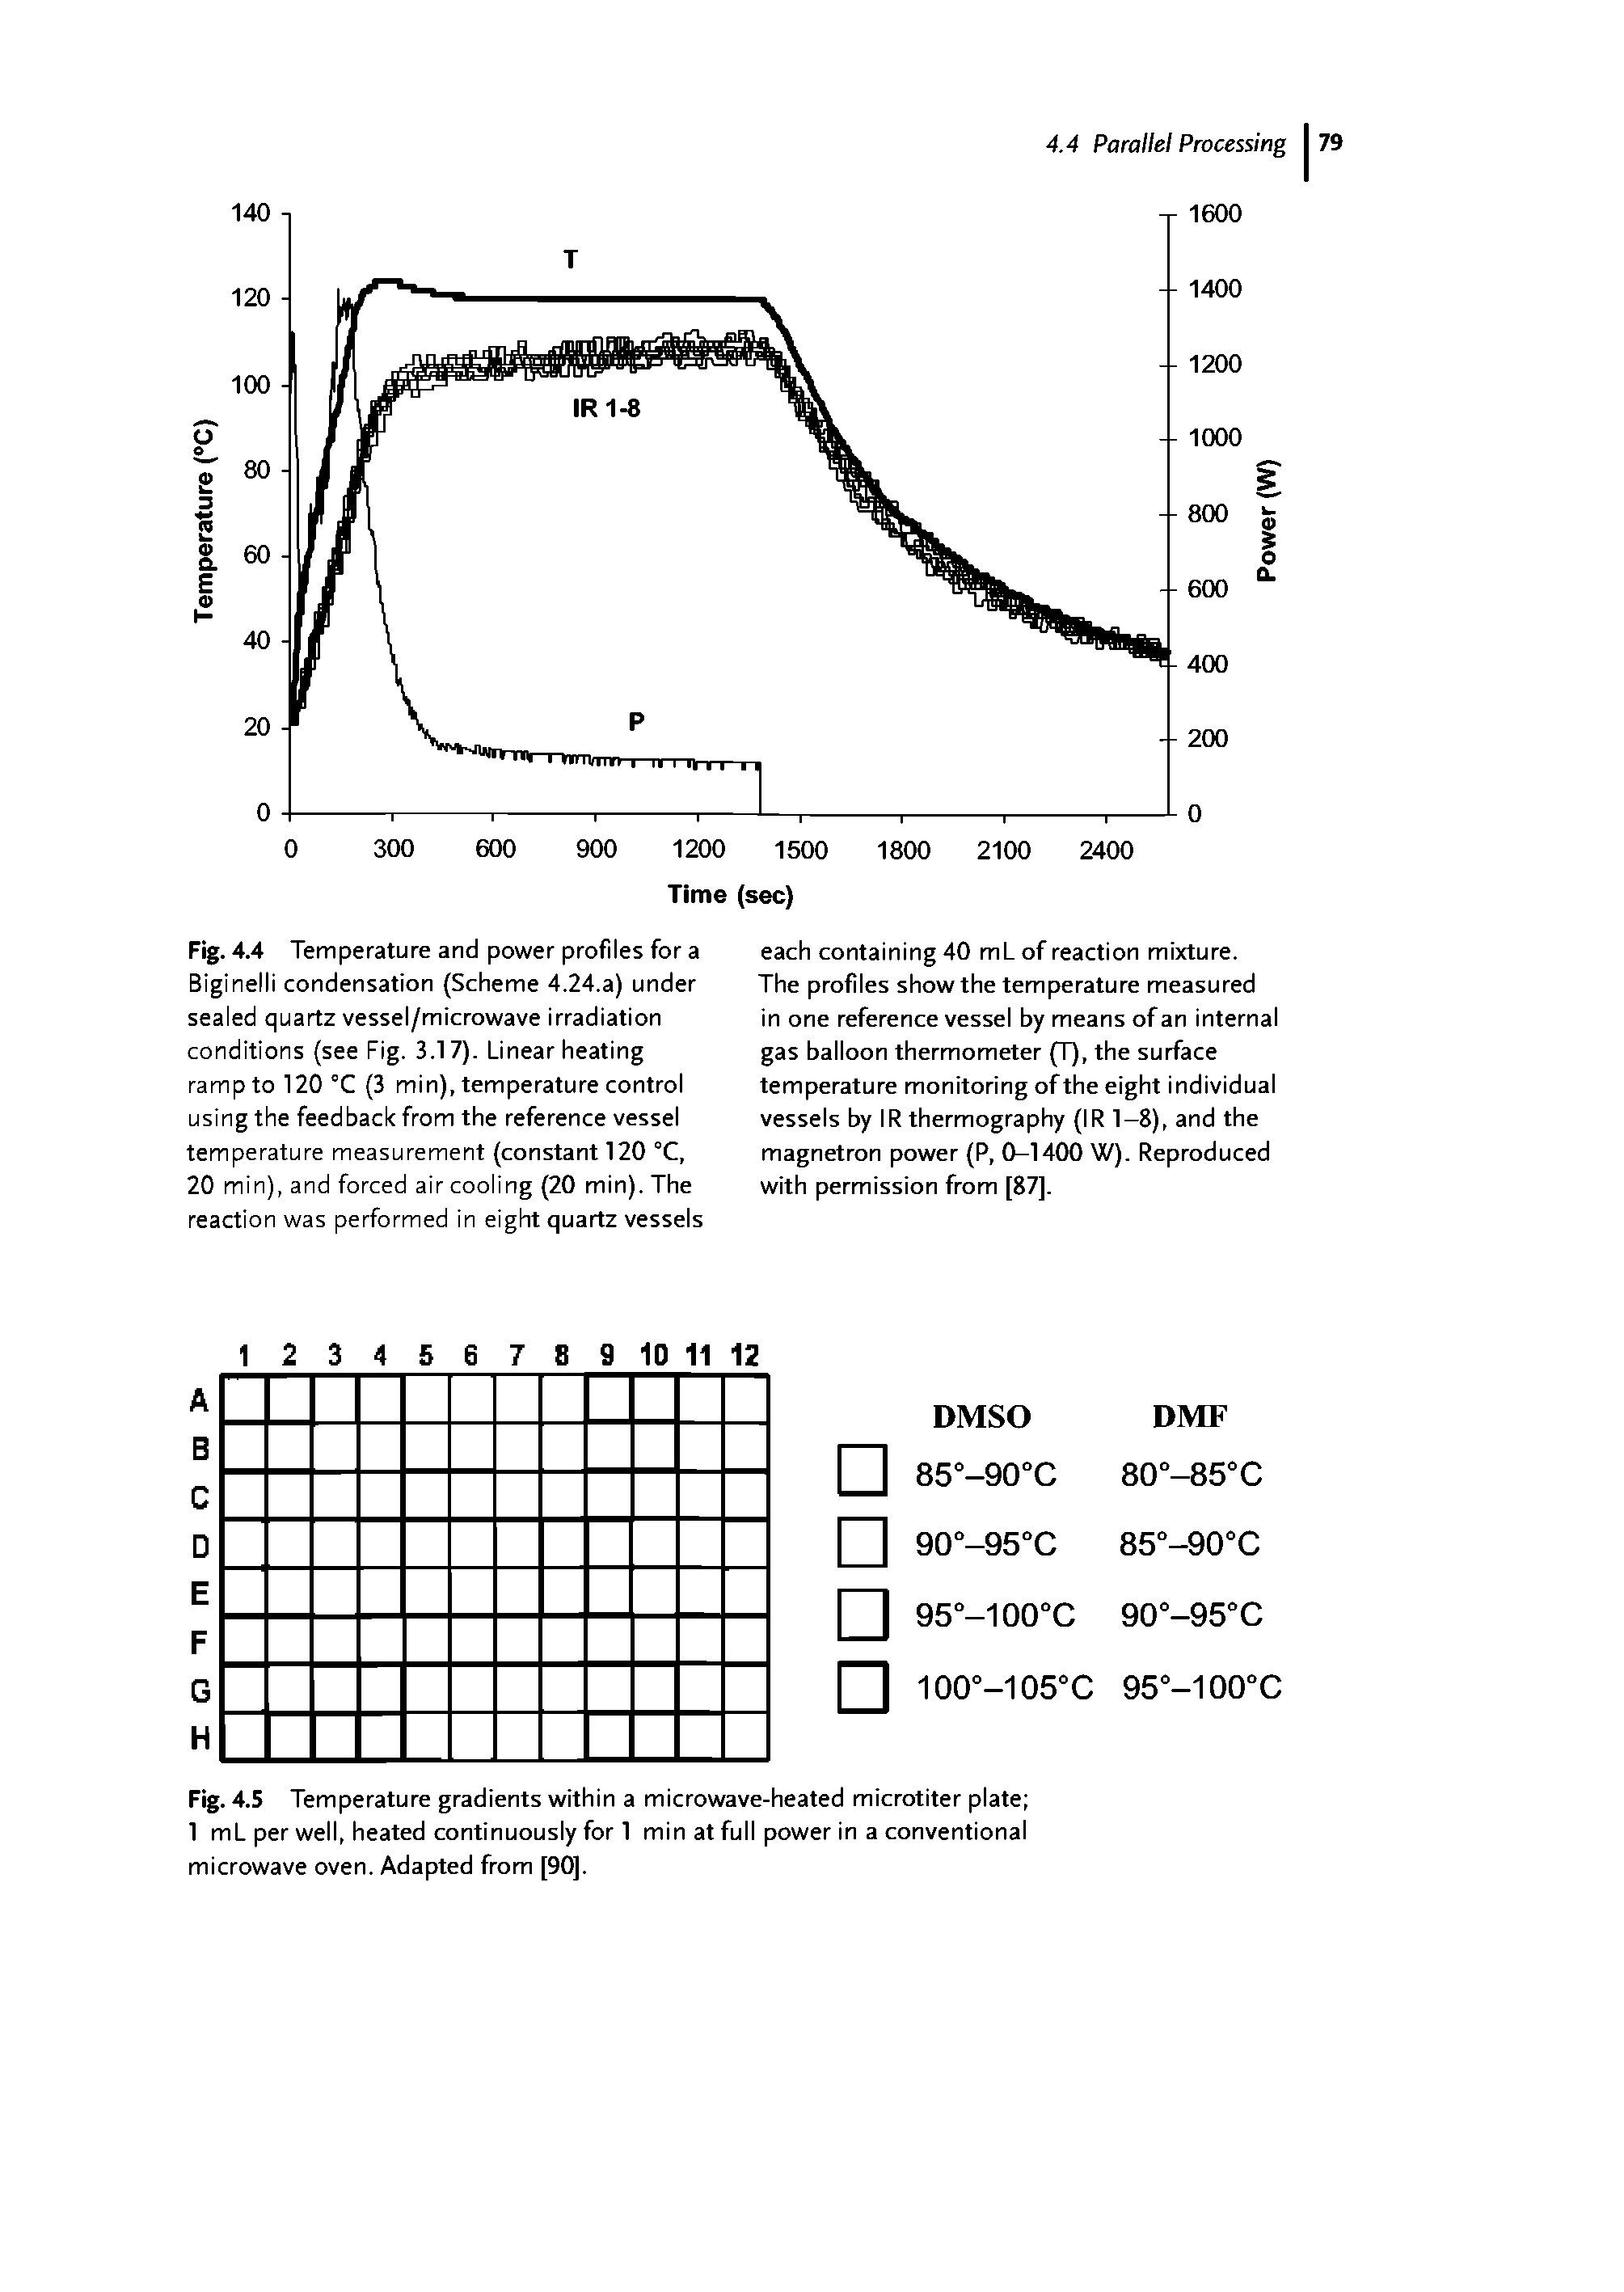 Fig. 4.5 Temperature gradients within a microwave-heated microtiter plate 1 mL per well, heated continuously for 1 min at full power in a conventional microwave oven. Adapted from [90].